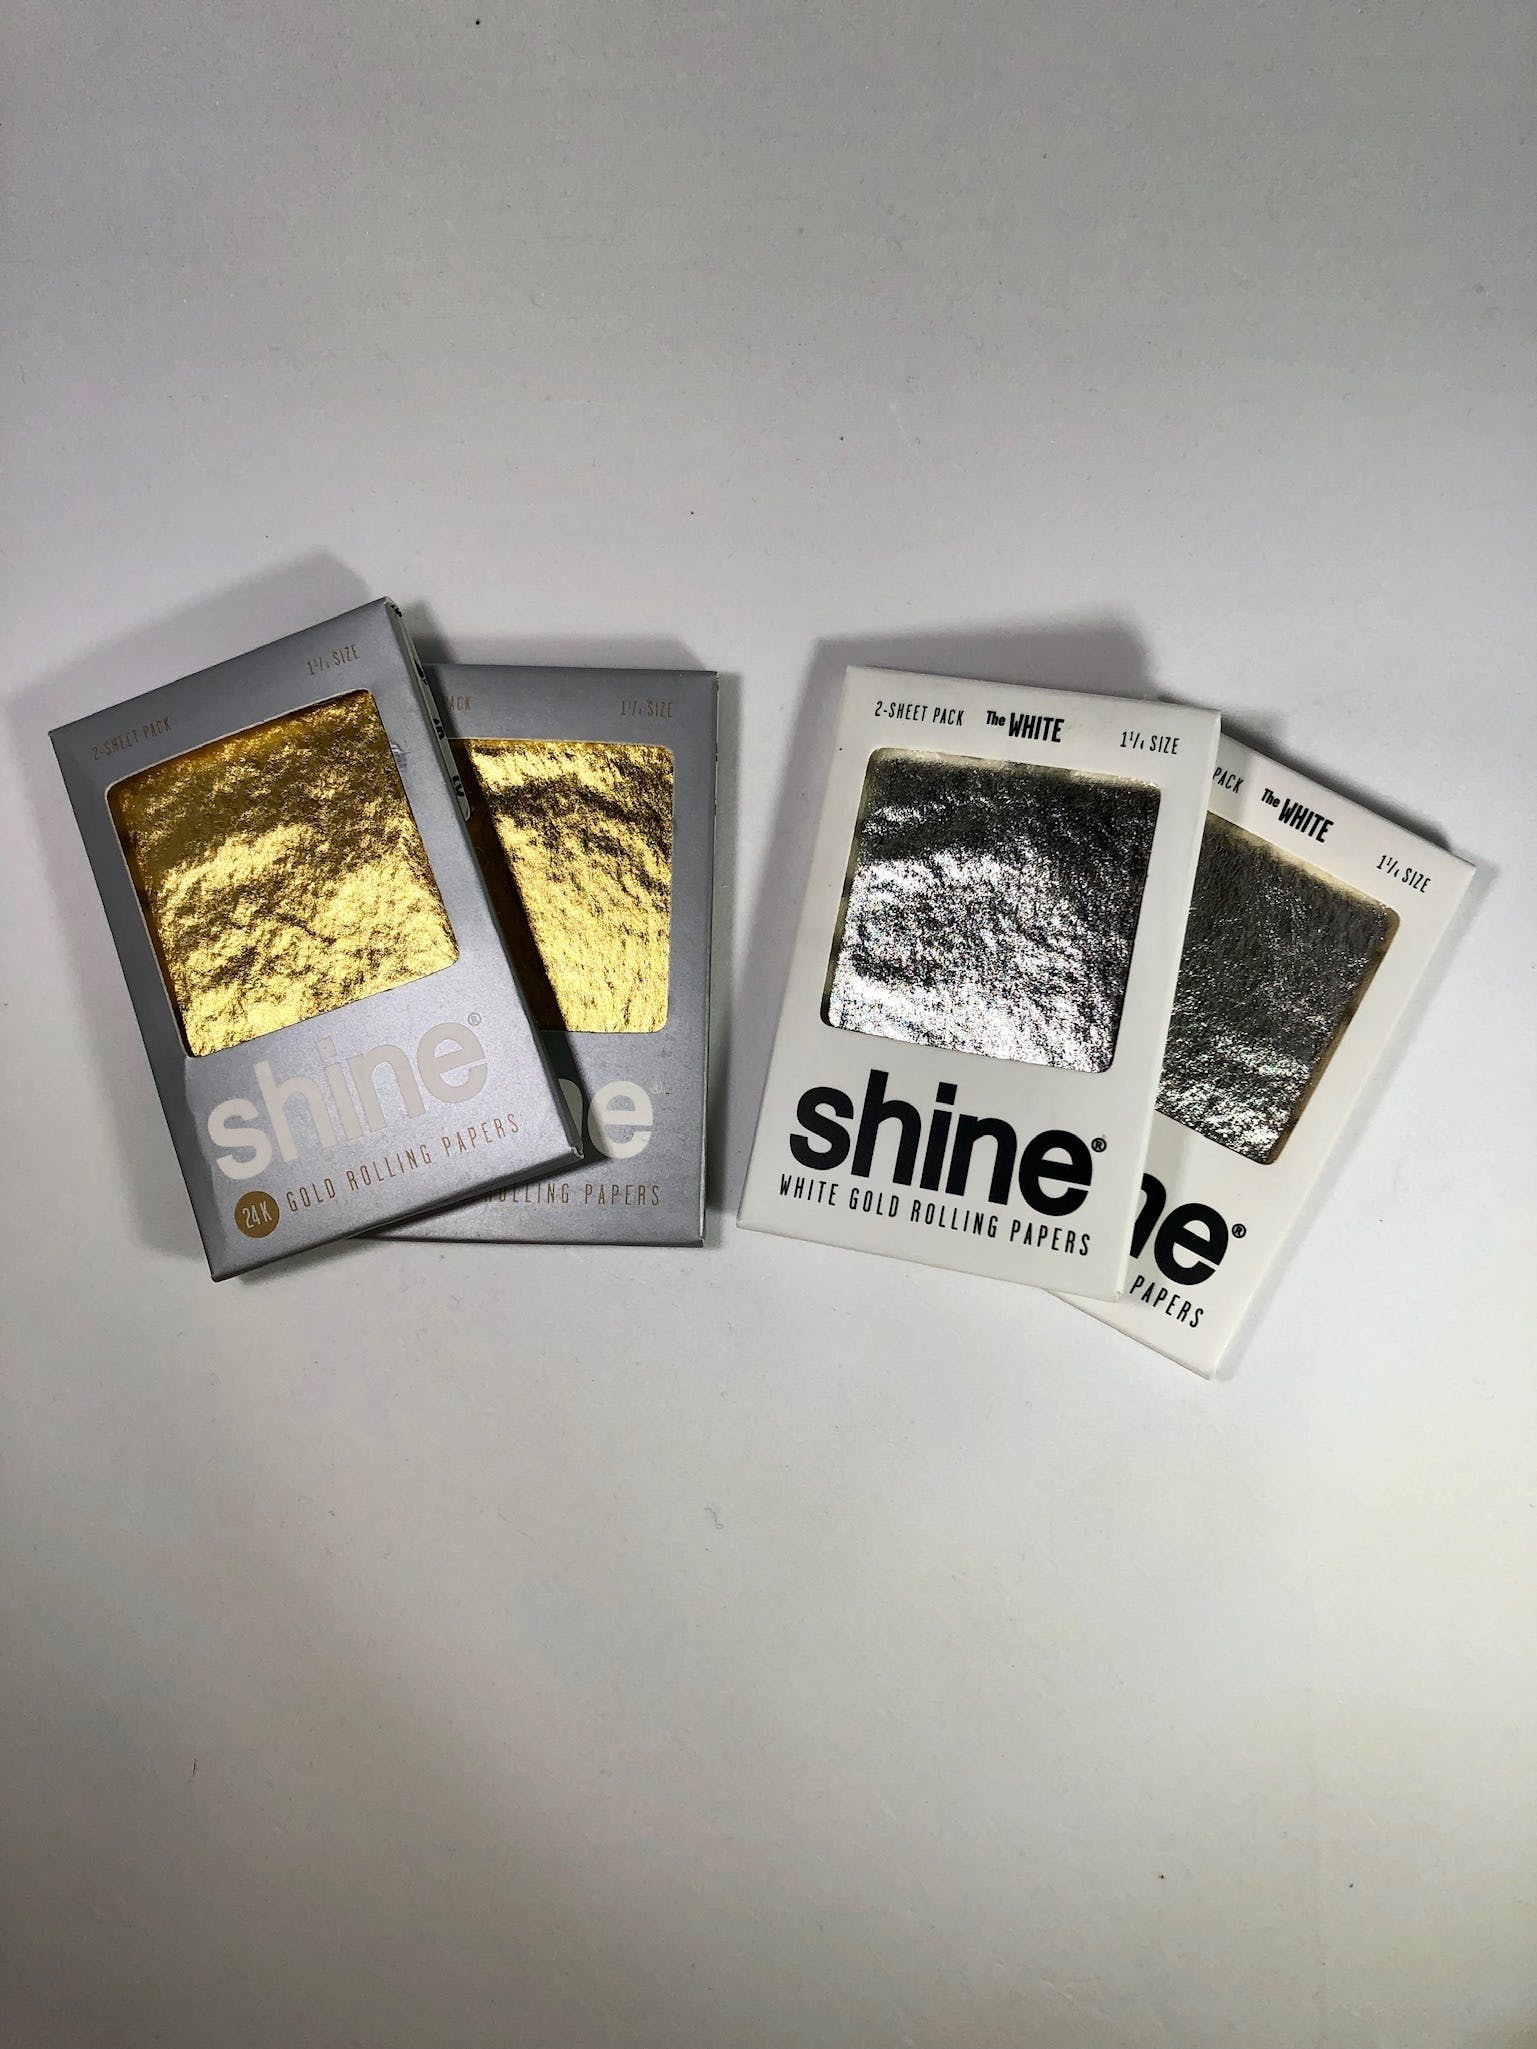 gear-shine-white-gold-rolling-papers-2-sheets-1-14